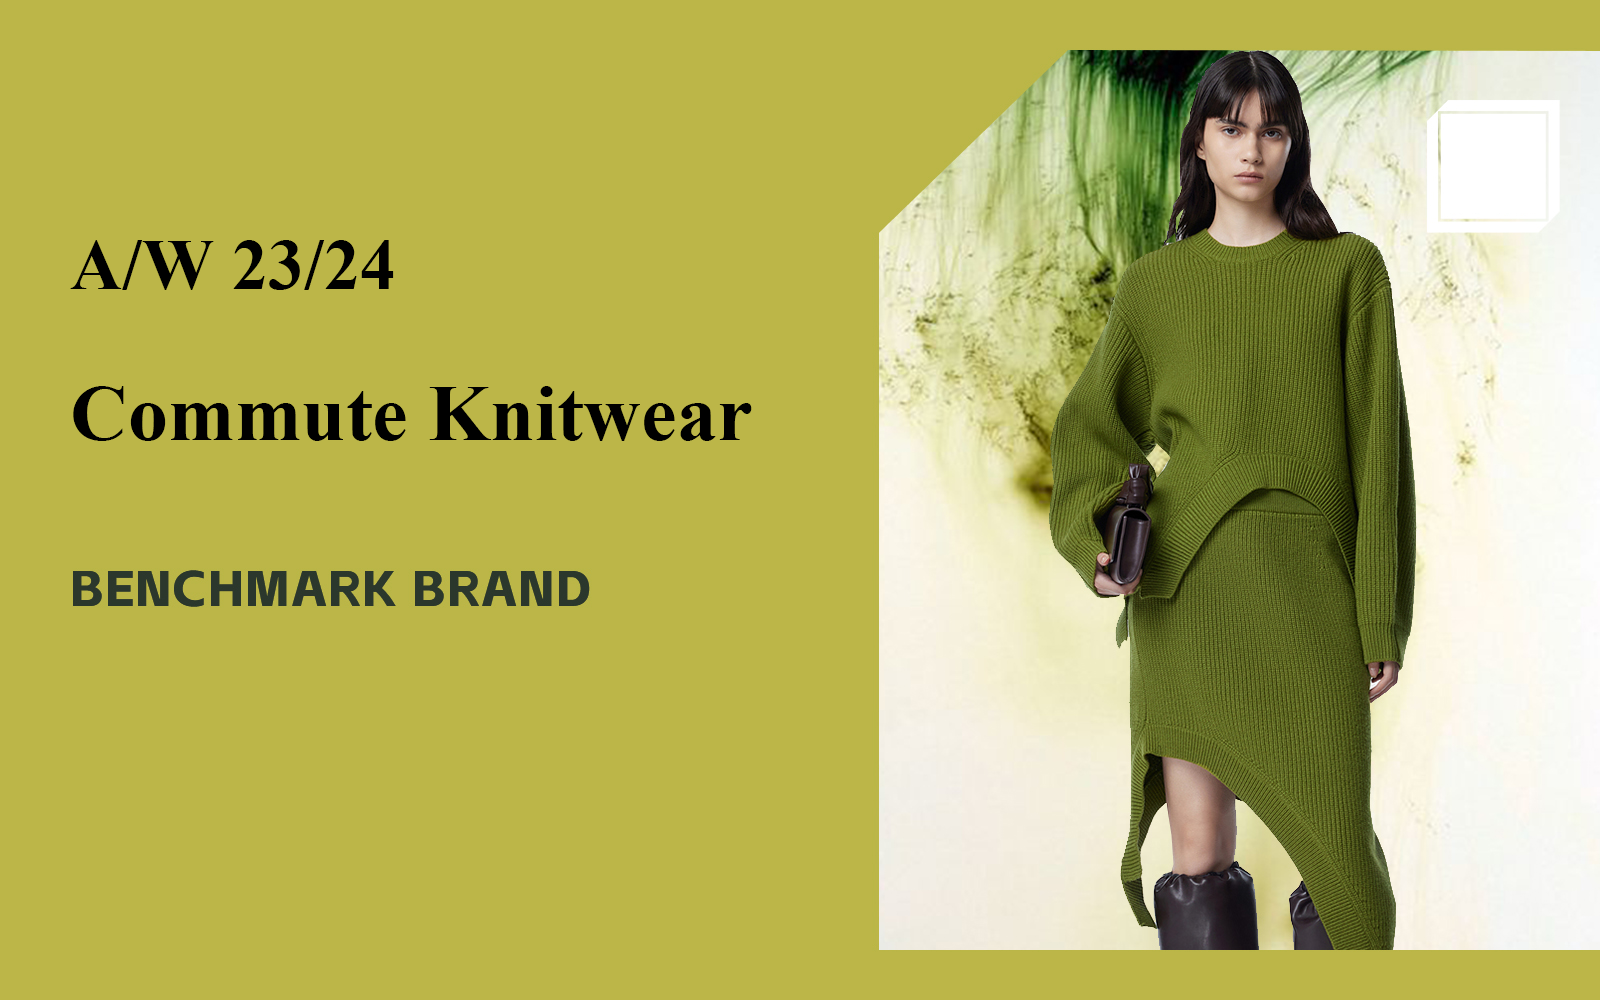 The Comprehensive Analysis of Chinese Benchmark Women's Knitwear Brand